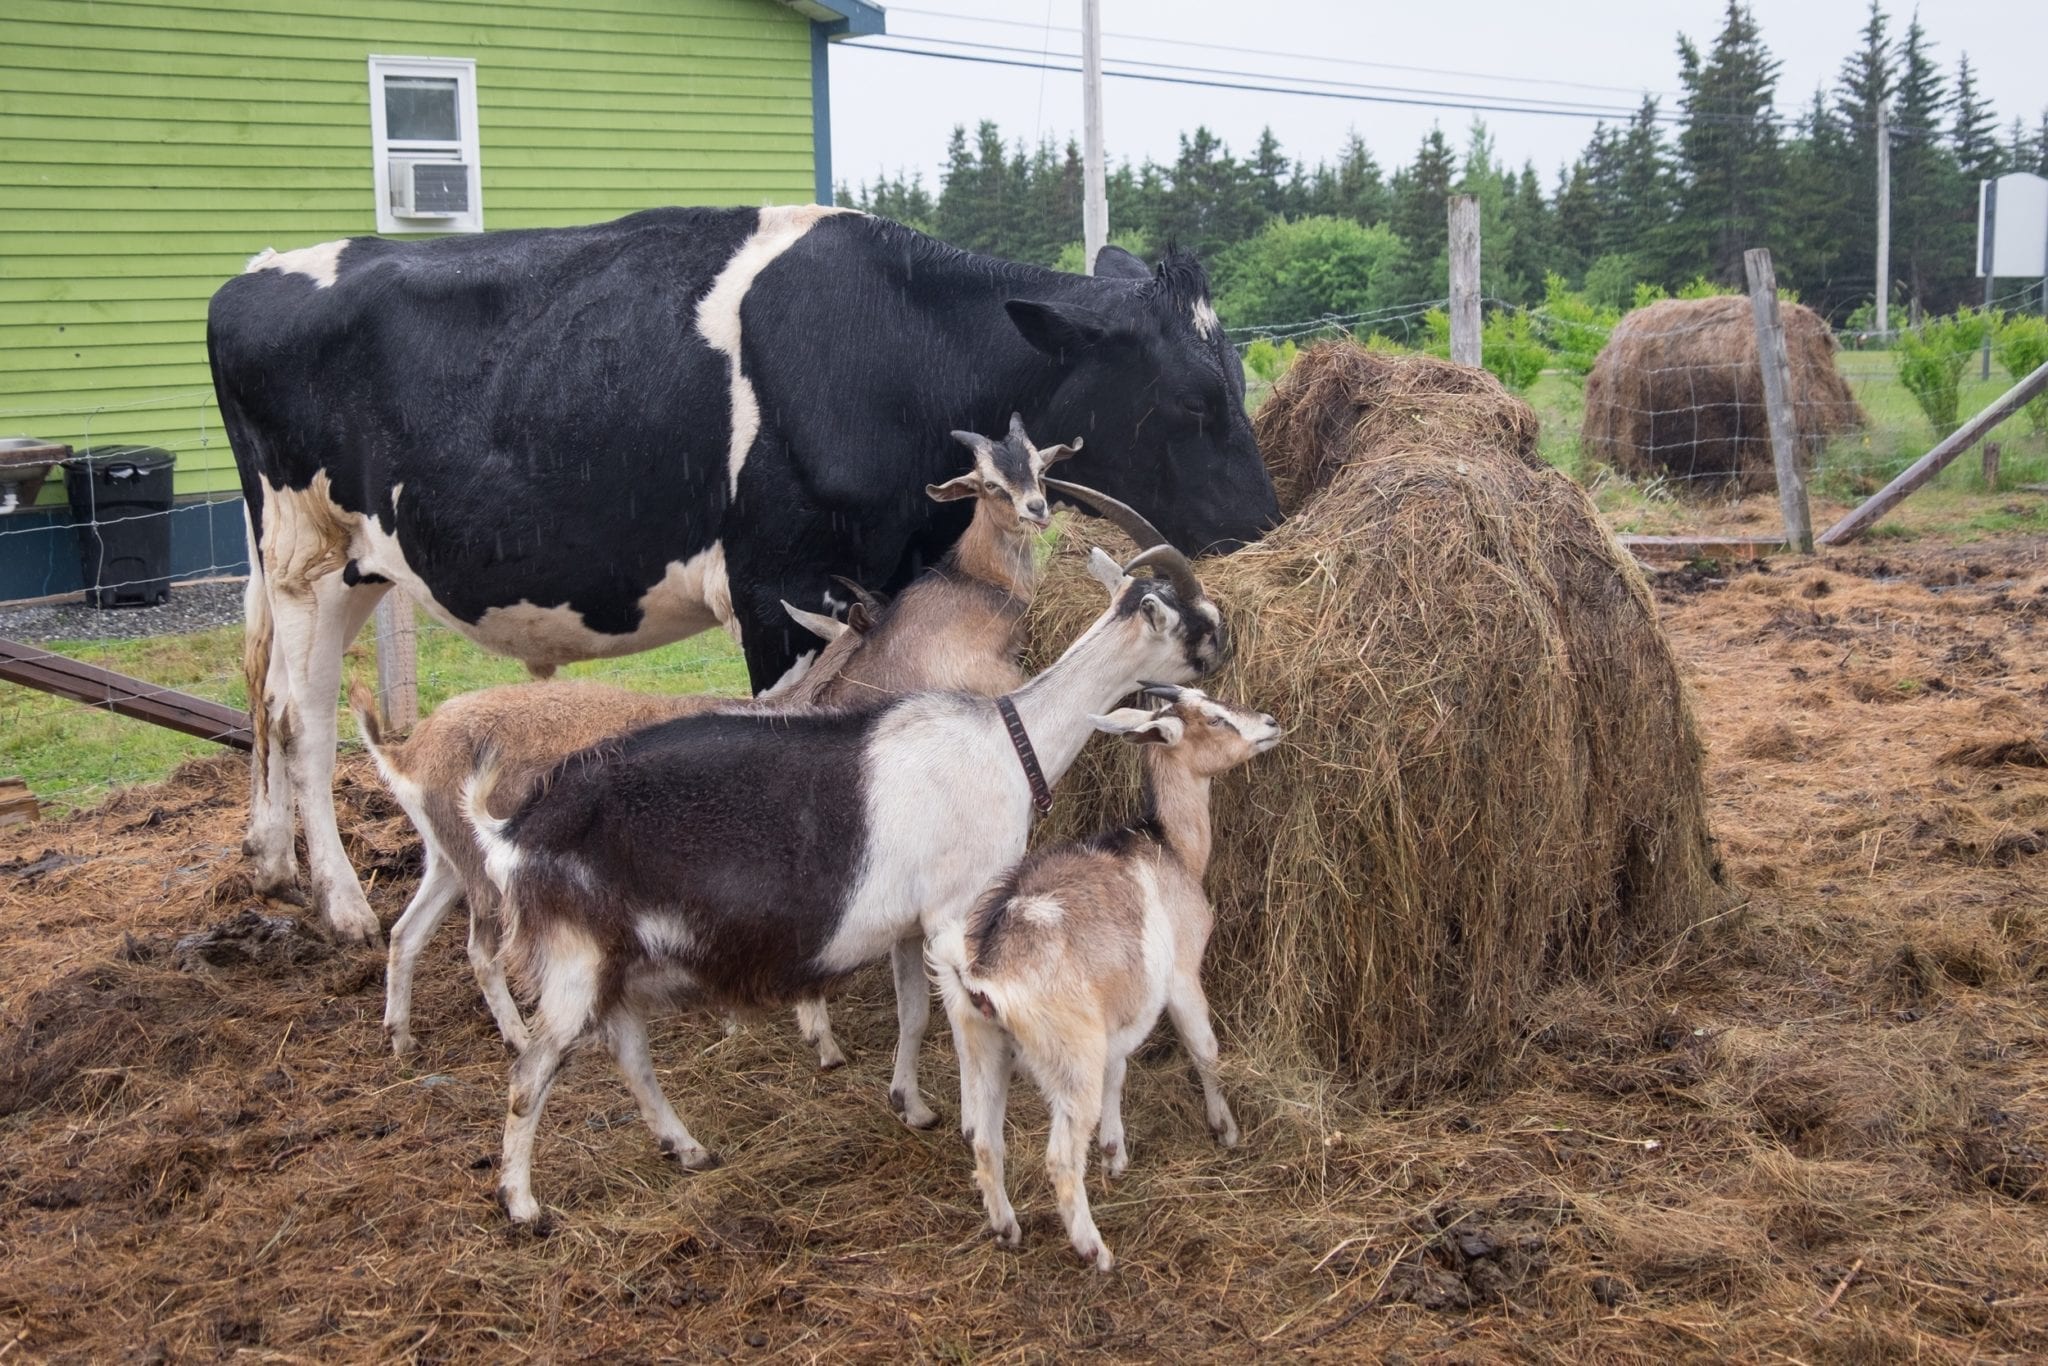 Several goats and a cow feeding on a bale of hay together in Cape Breton.